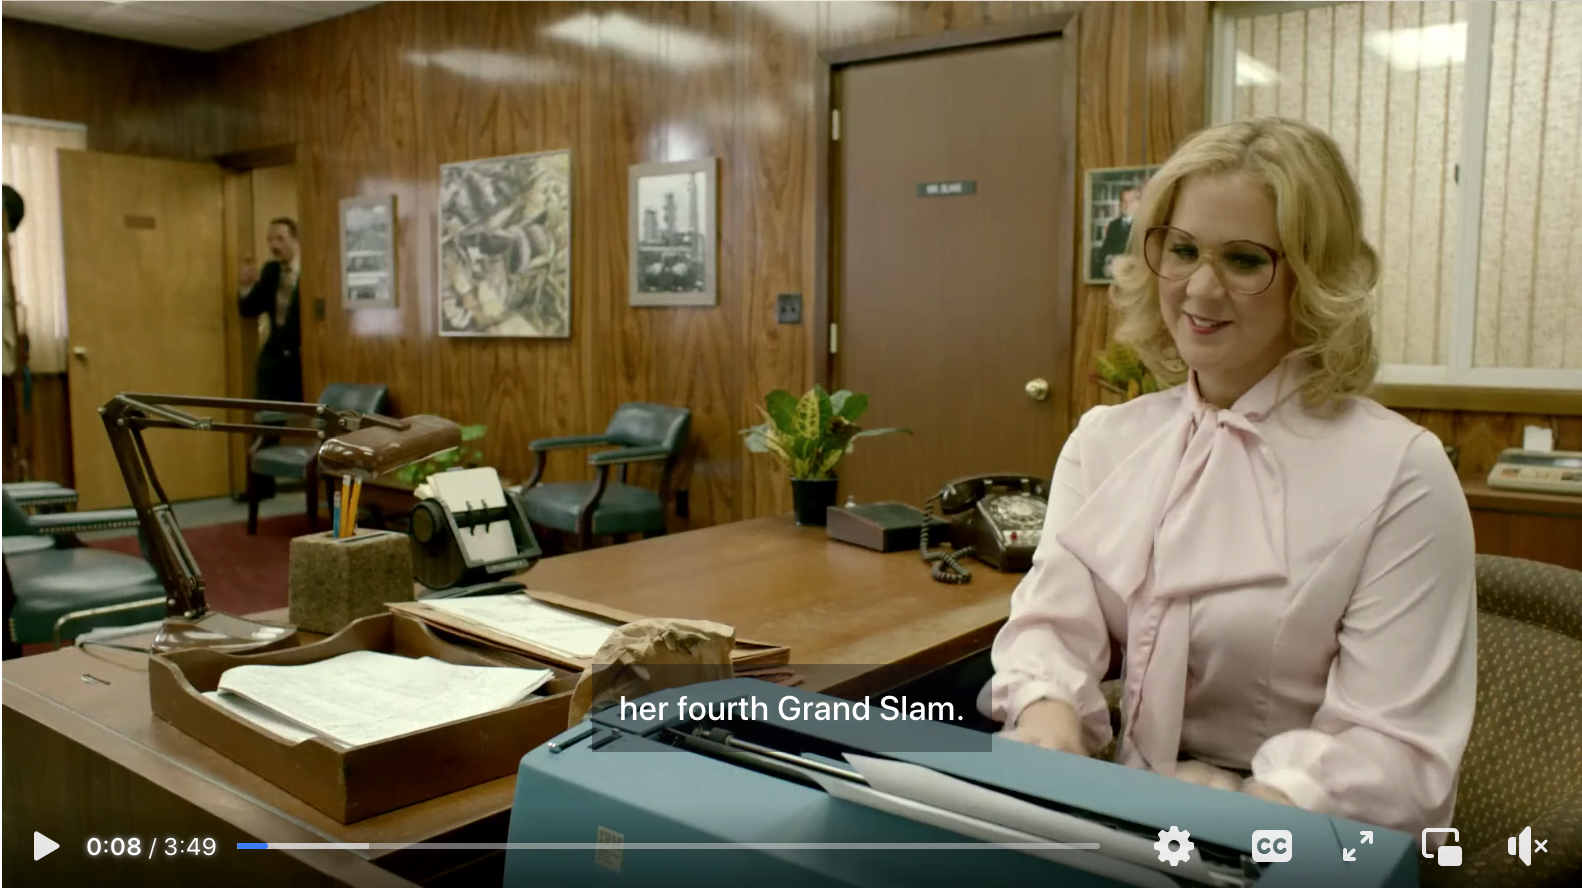 Amy Schumer in character as a 1970s secretary. The closed caption reads "her fourth Grand Slam."